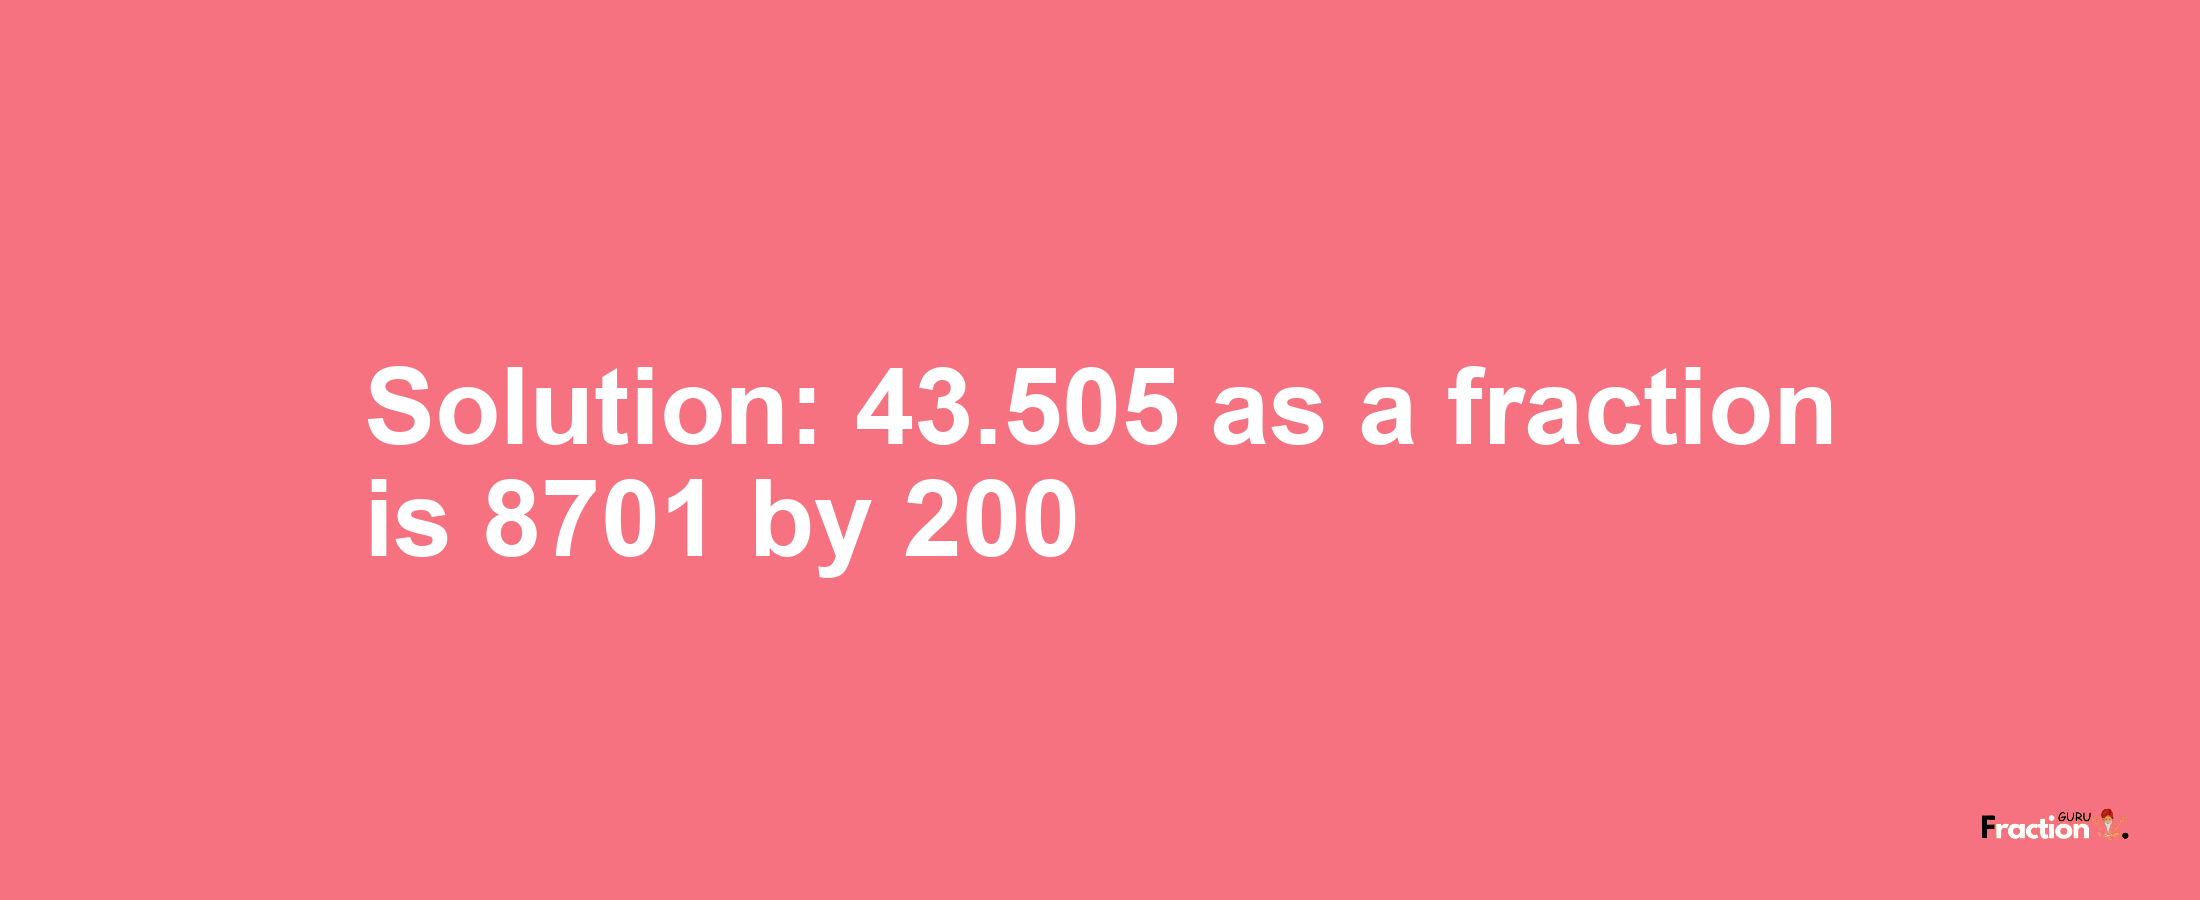 Solution:43.505 as a fraction is 8701/200